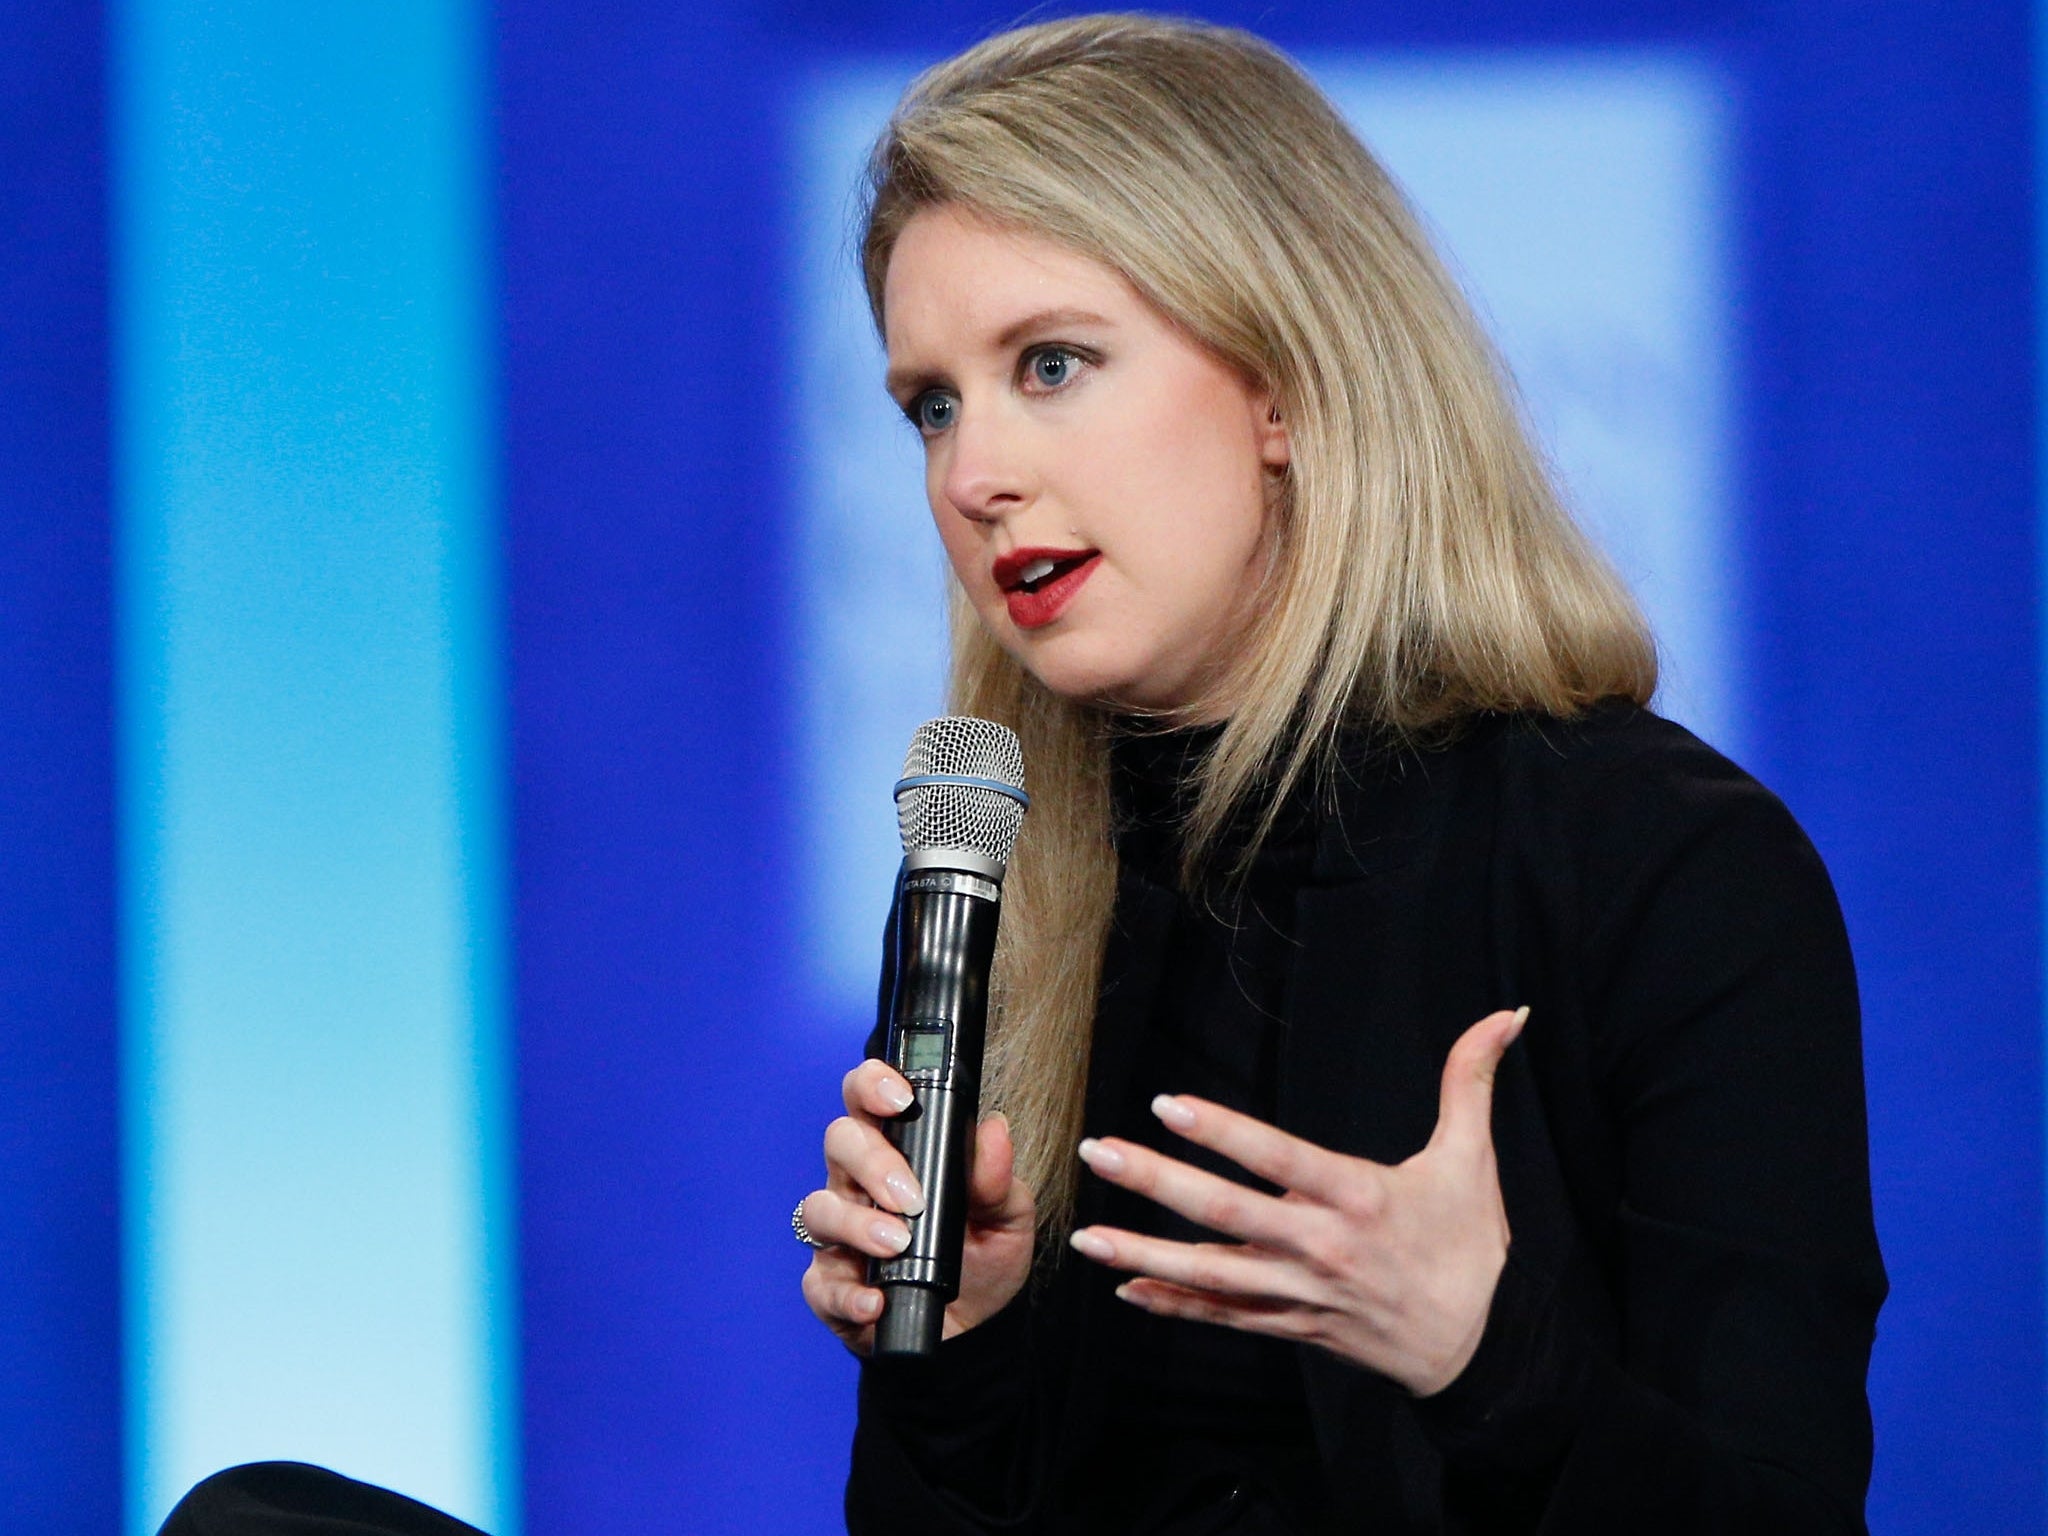 Elizabeth Holmes speaks on stage during the closing session of the Clinton Global Initiative 2015